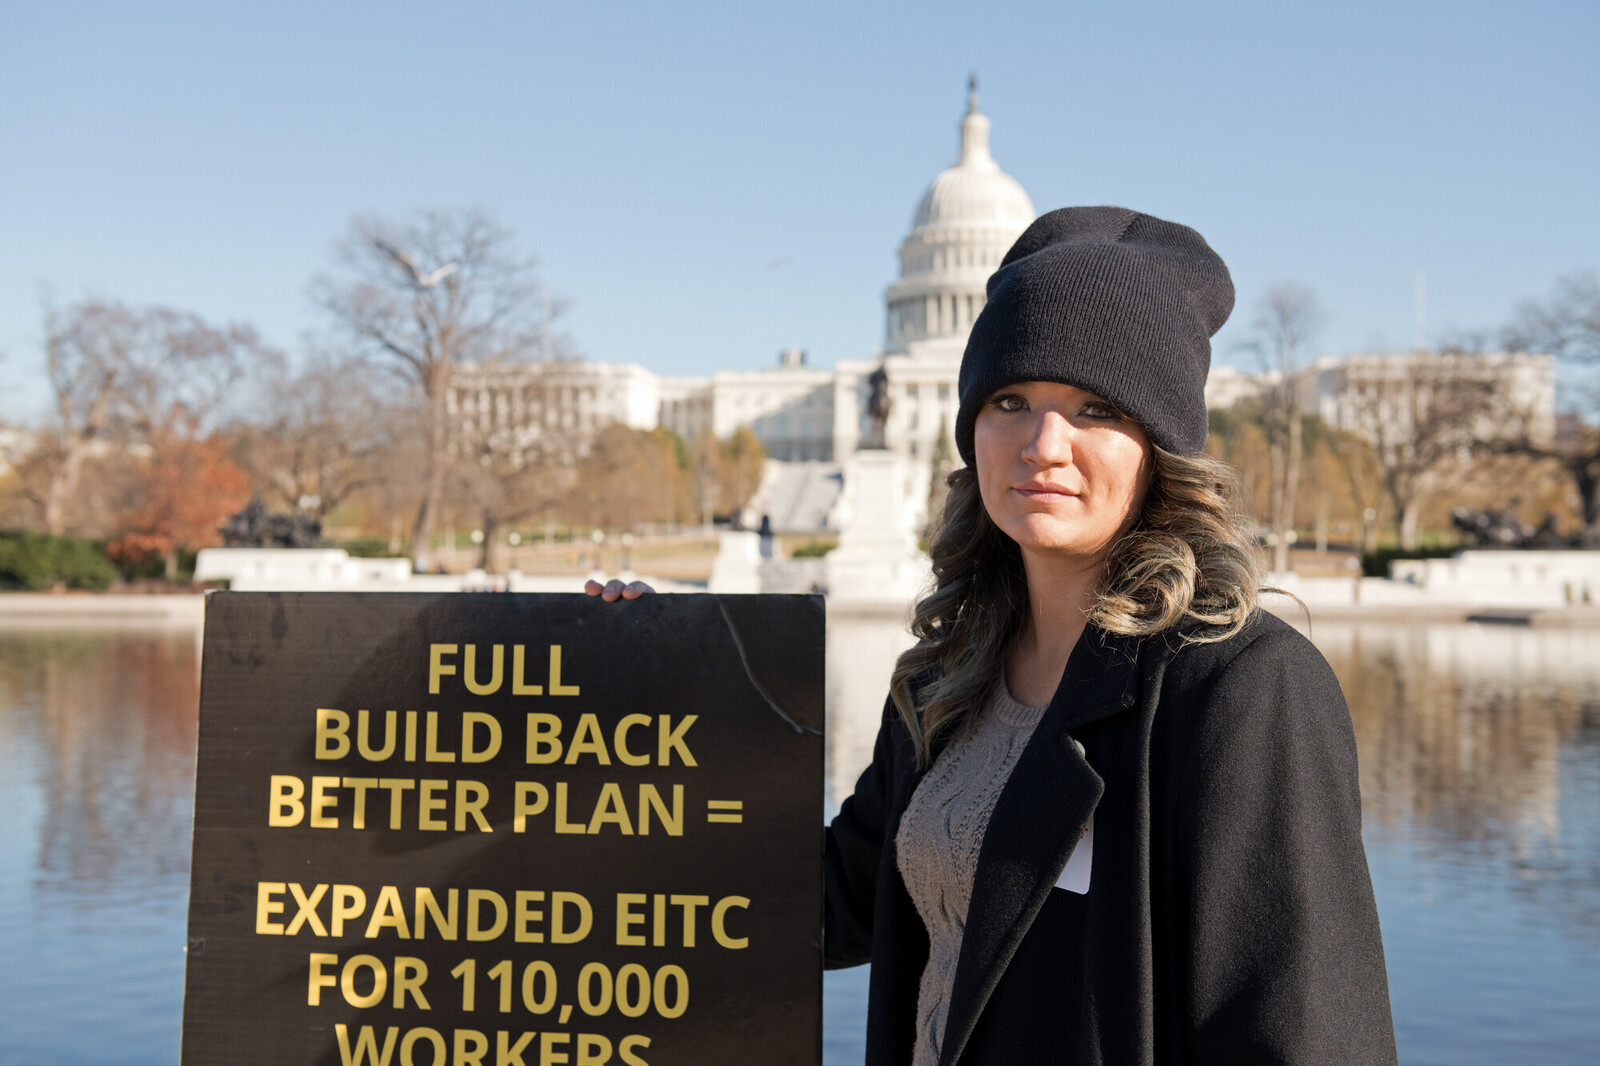 West Virginia AFSC speaks out against Manchin’s refusal to support Build Back Better